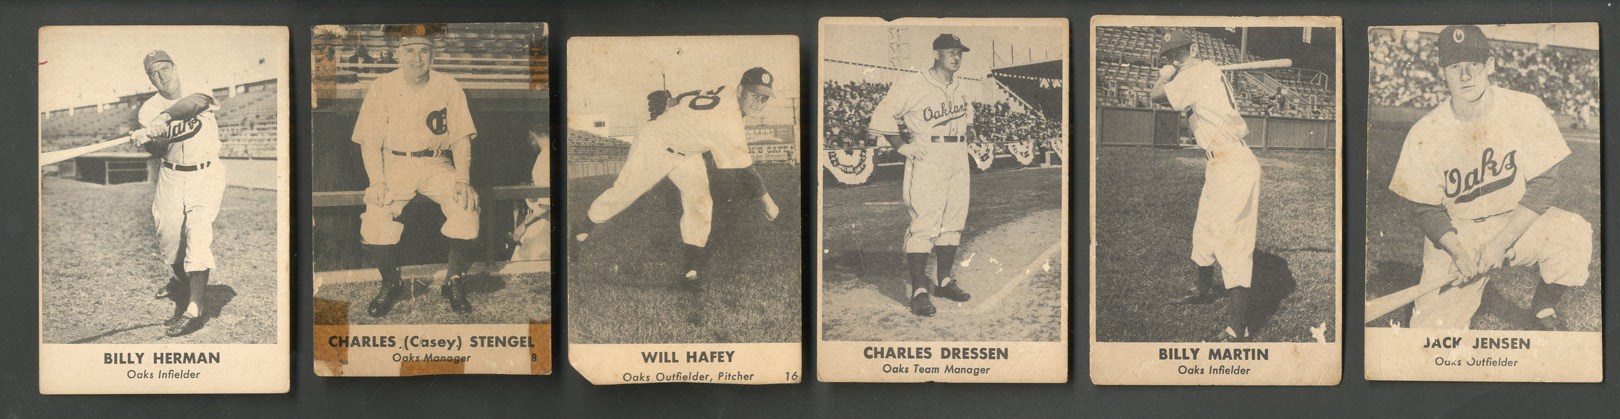 1946-50 Remar Bread PCL Collection with Billy Martin and Casey Stengel